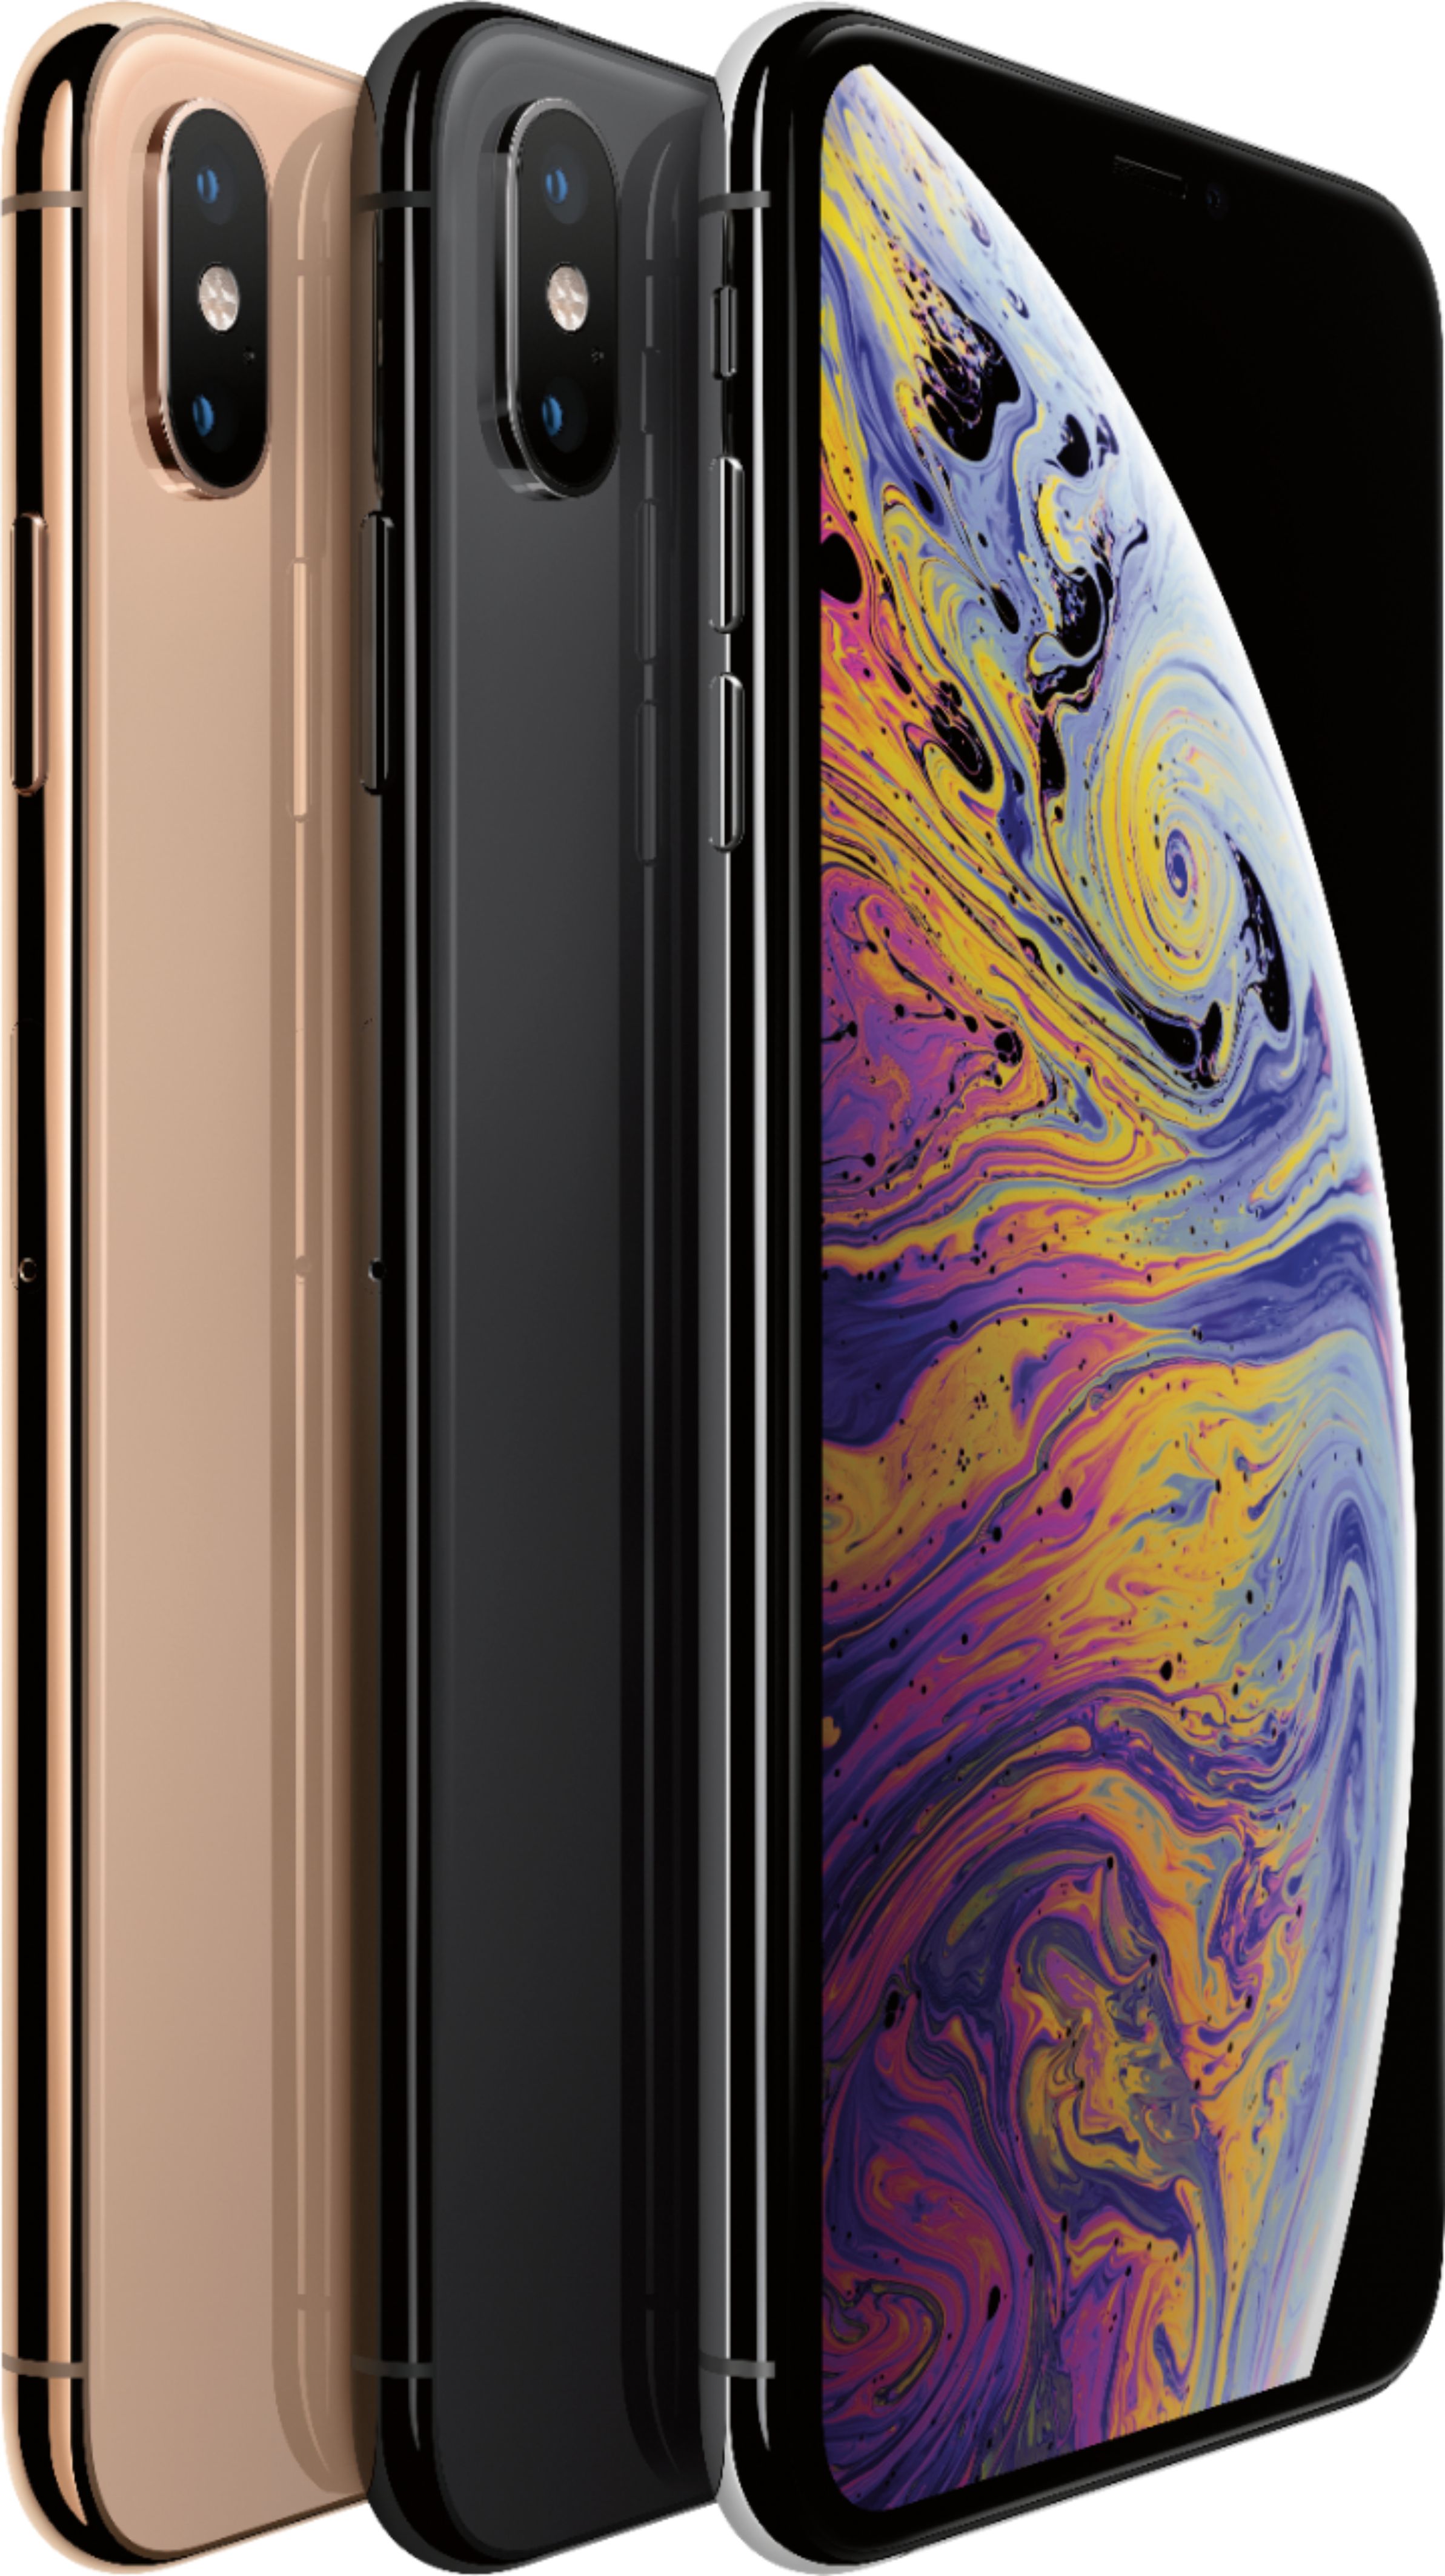 Apple iPhone XS Max 64GB Space Gray (Sprint) MT592LL/A - Best Buy